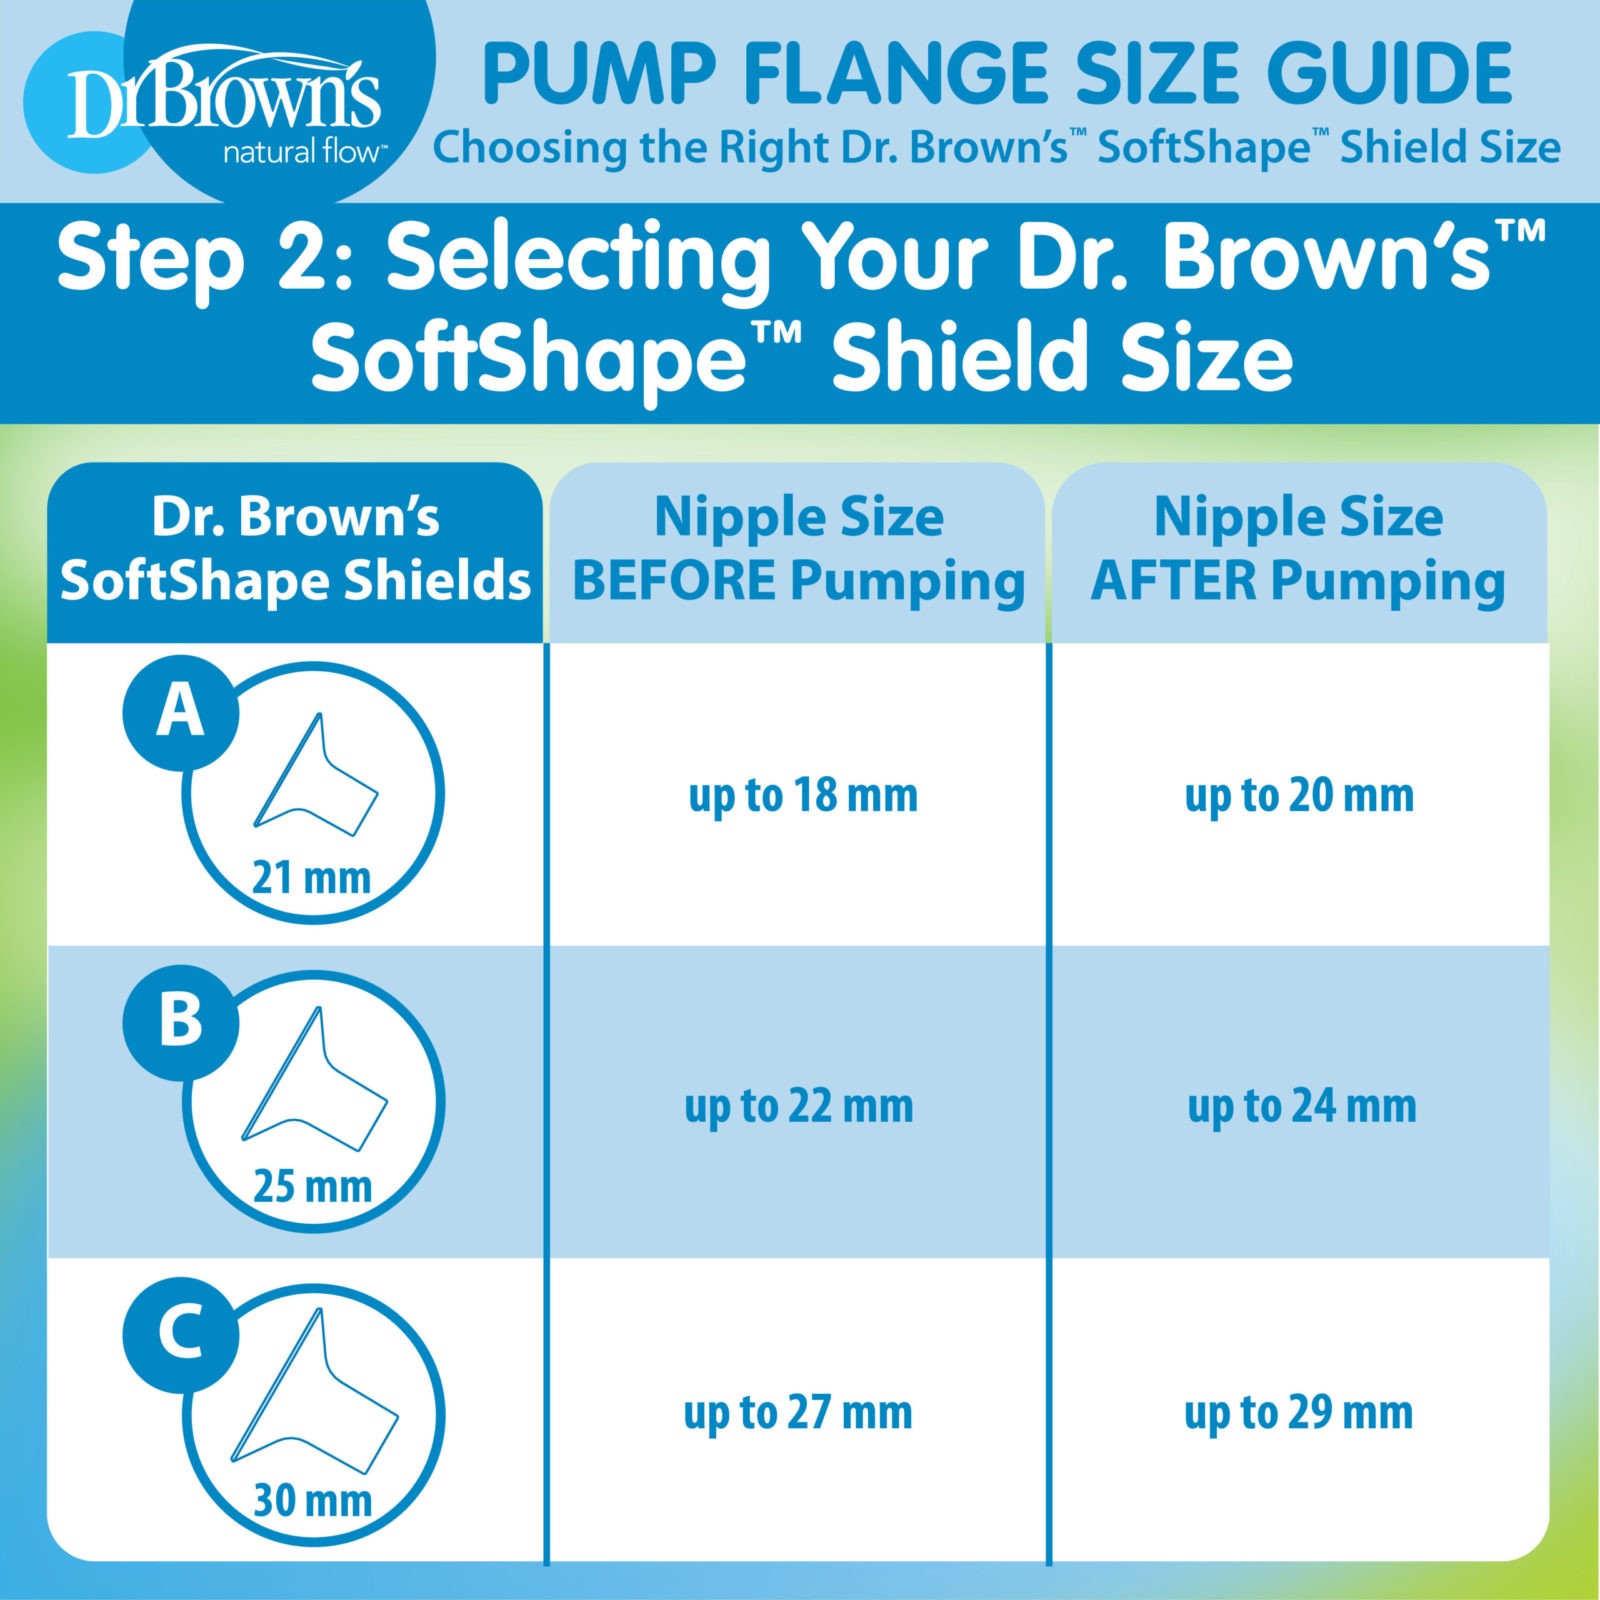 What's My Breast Size?, Flange Guide